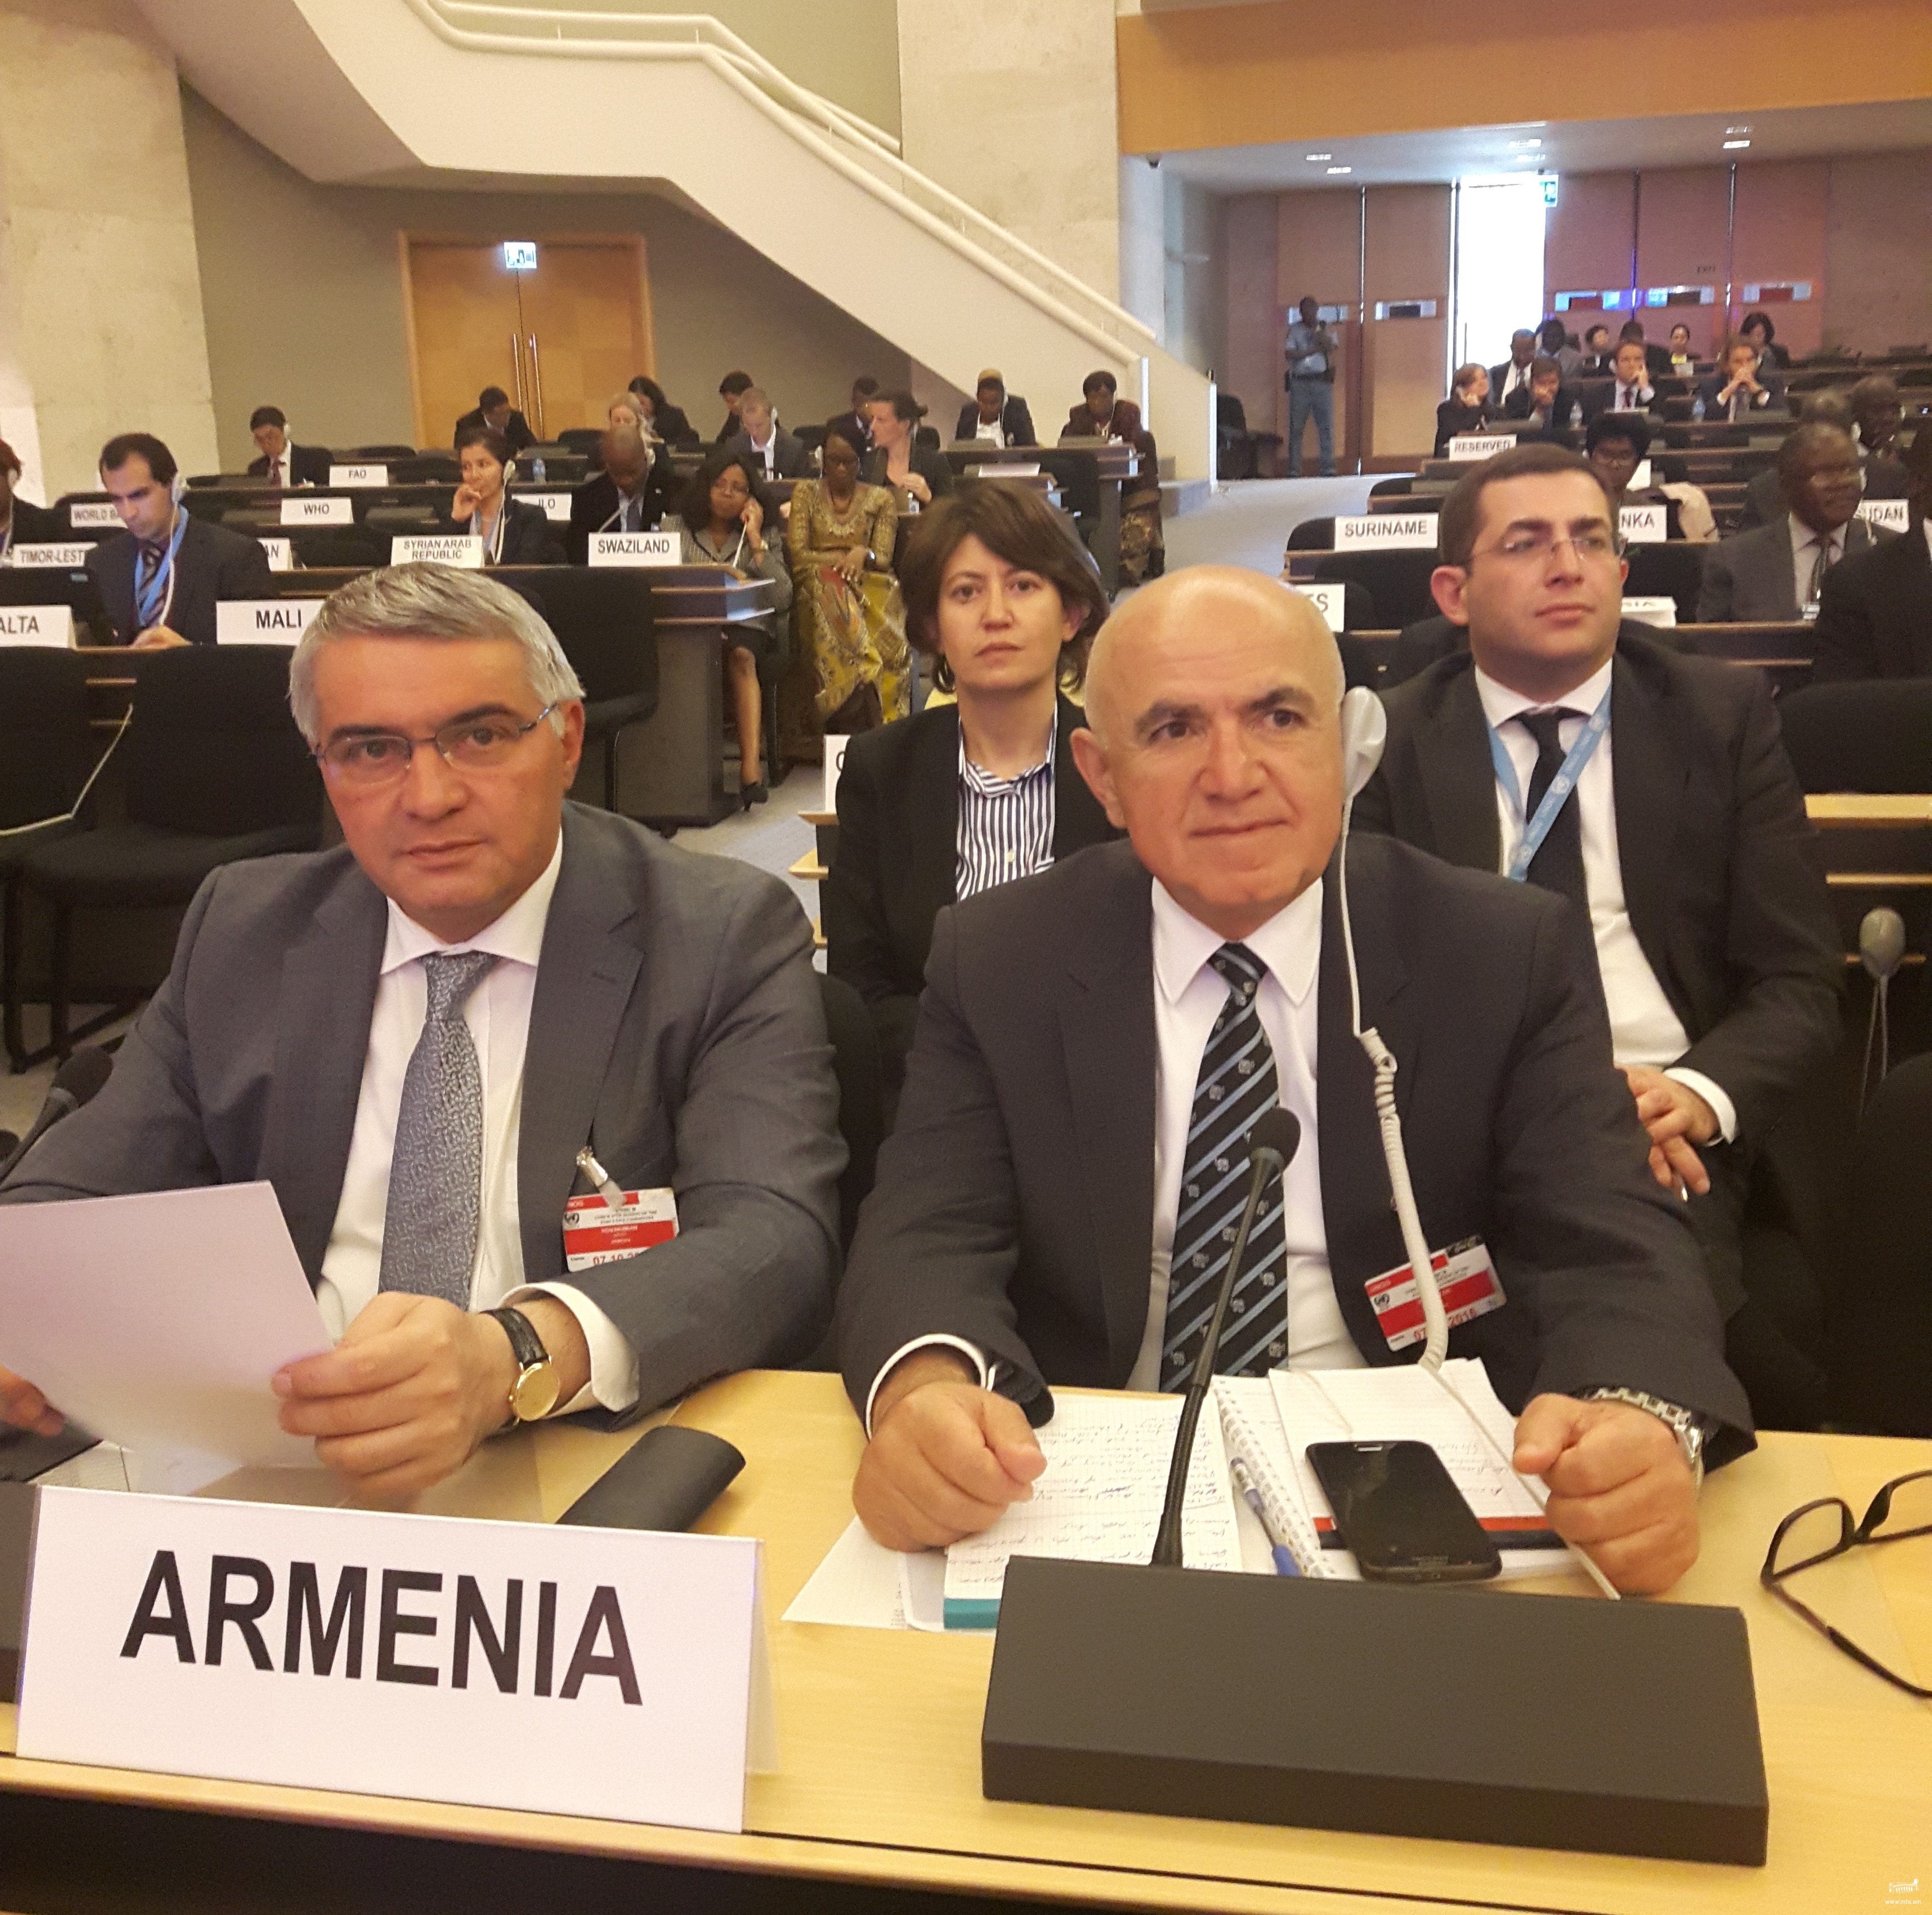 Deputy Minister Hovakimyan participated in the 67th Session of the Executive Committee of the United Nations High Commissioner for Refugees.